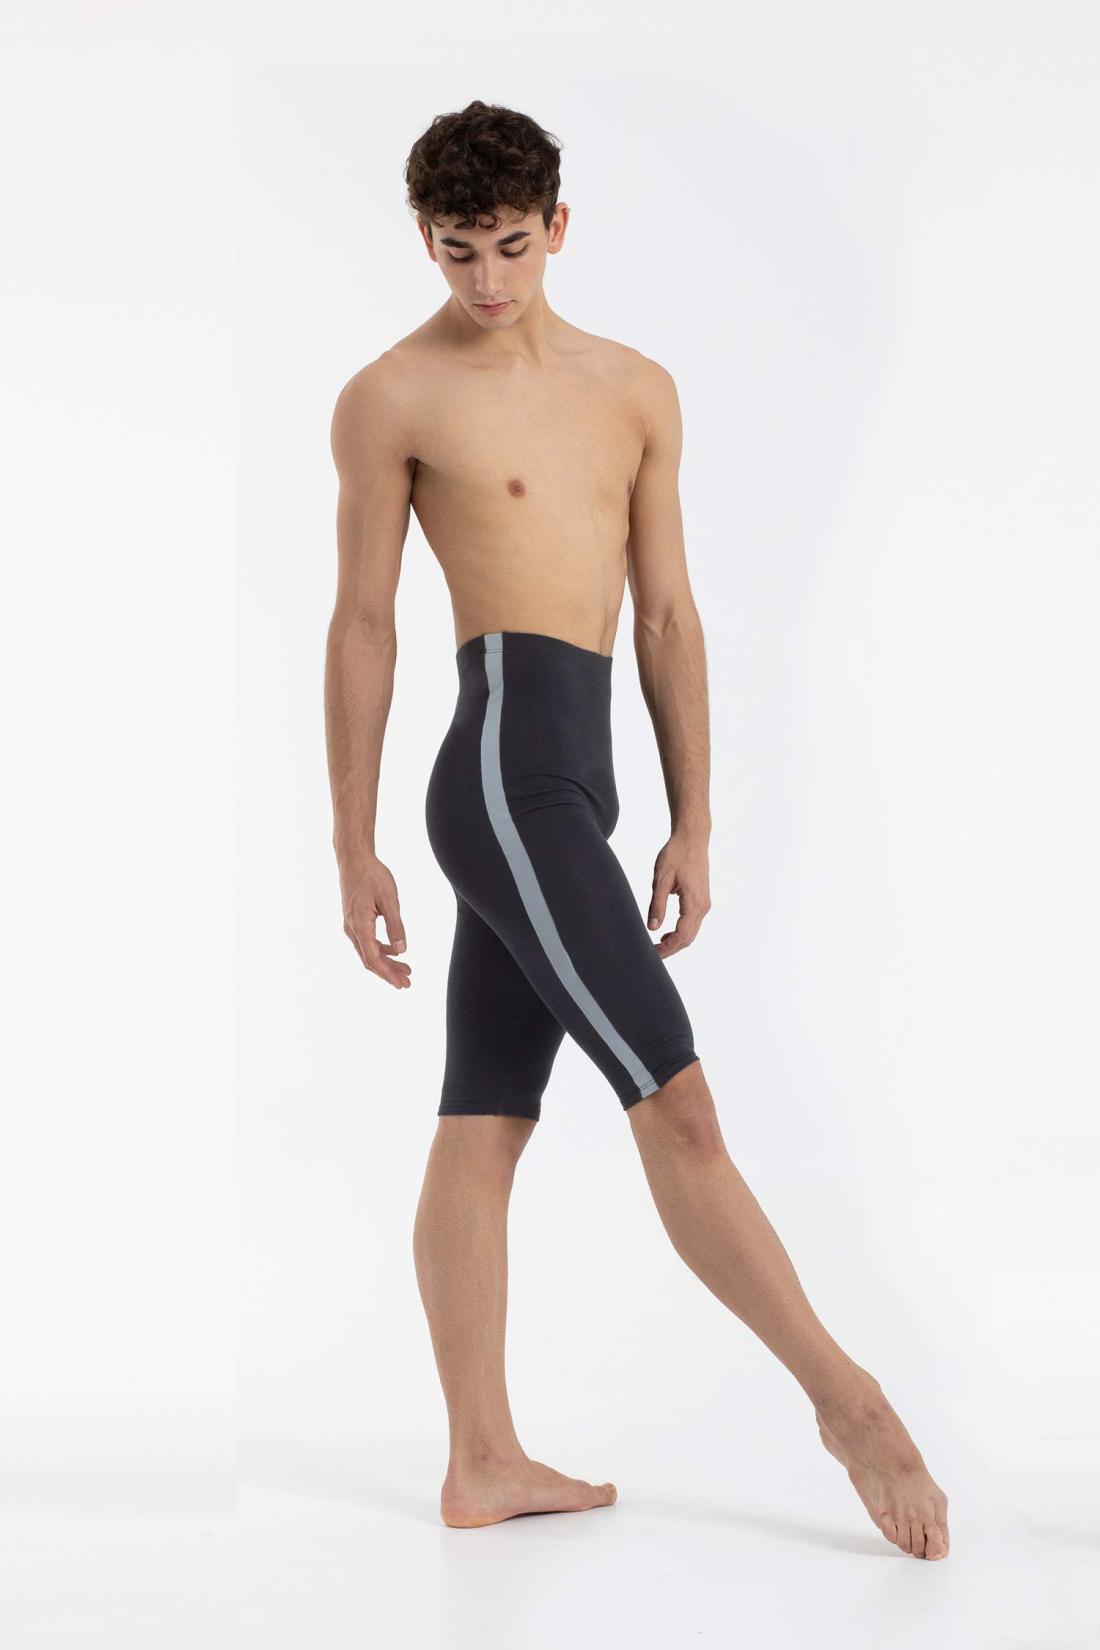 Over-the-knee Men's Pants with stripe on the sides for Male Dancers in Organic Cotton Intermezzo Ballet Dance